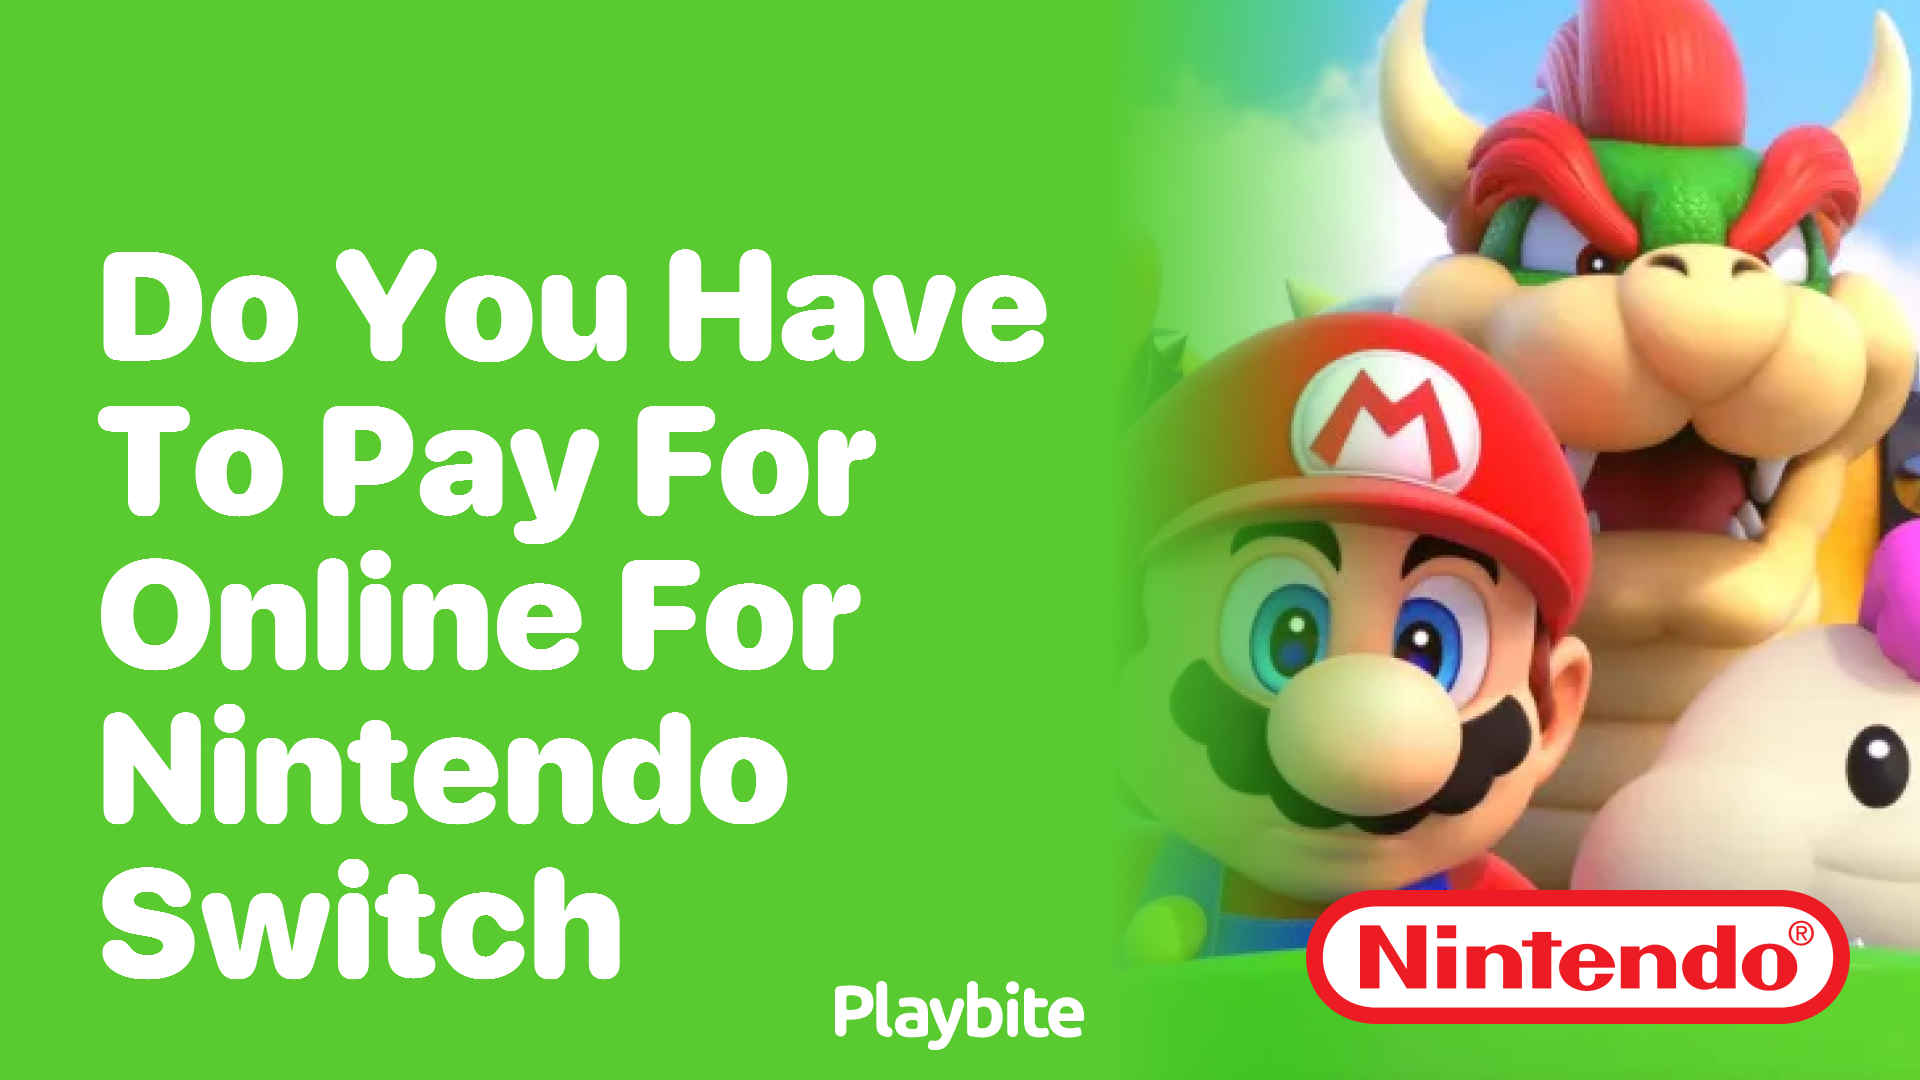 Do You Have to Pay for Online Services on the Nintendo Switch?